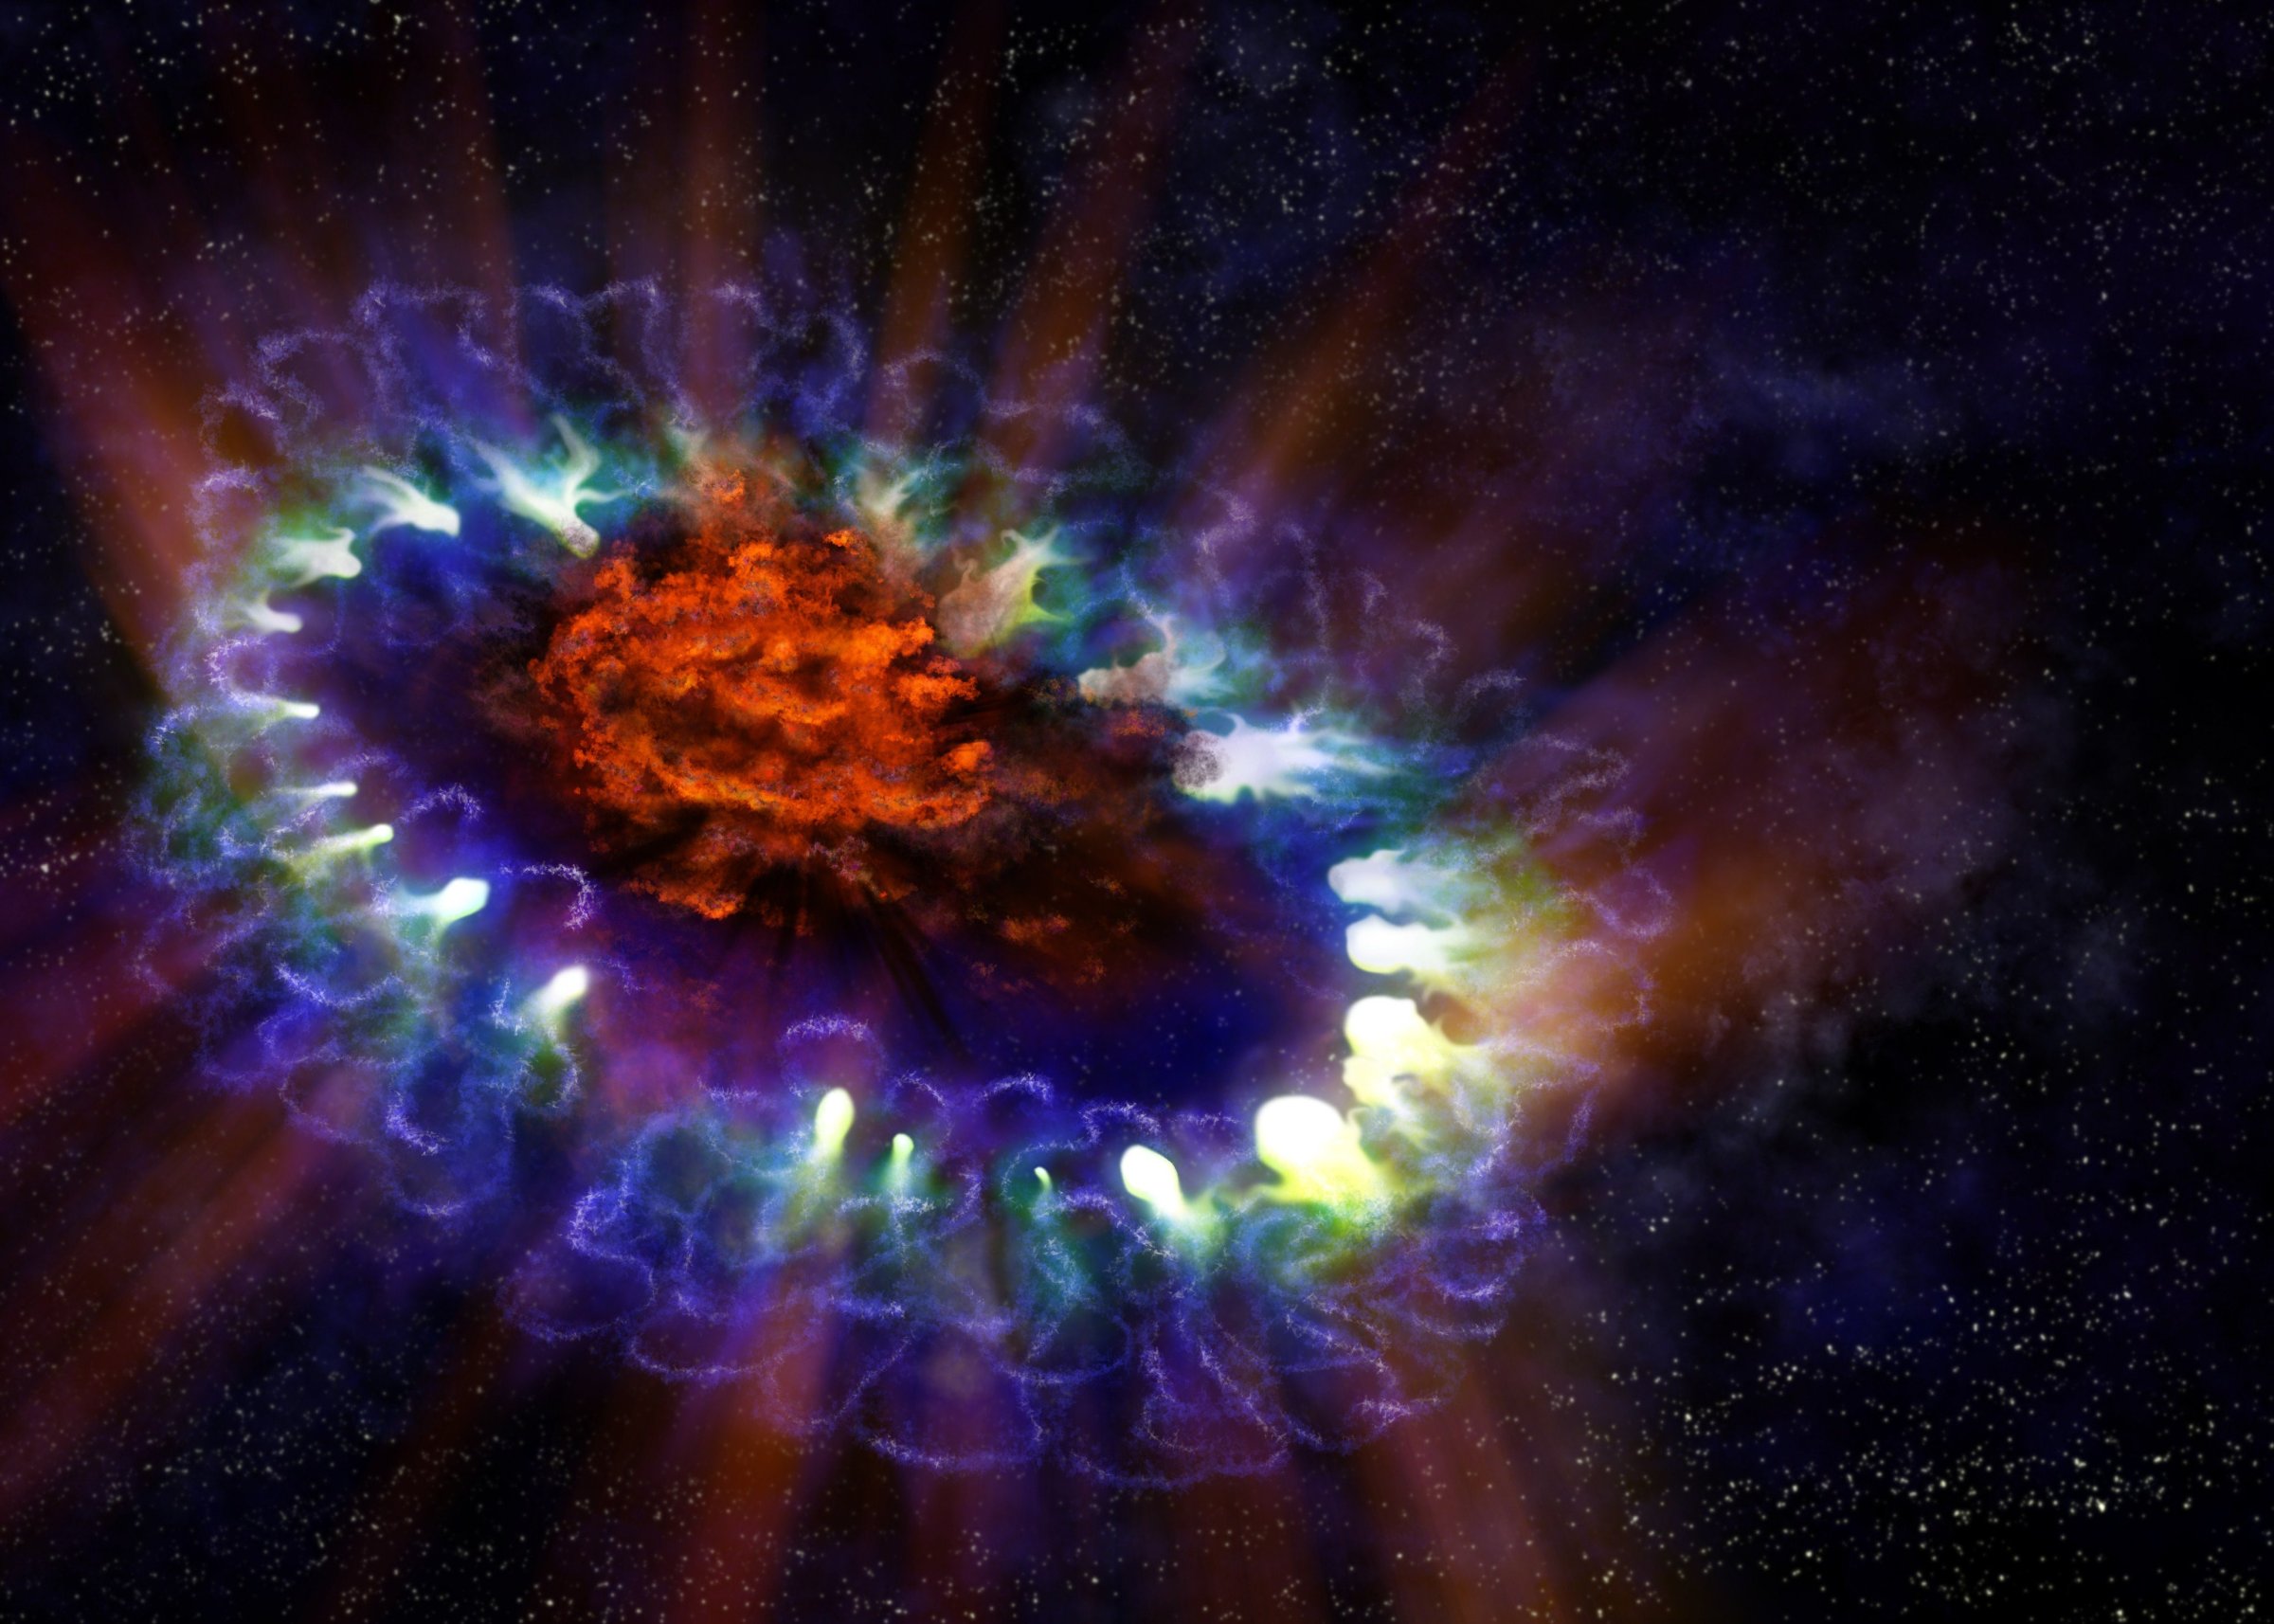 Artist's illustration of Supernova 1987A, based on real data with the cold, inner regions of the exploded star's remnants (in red) where tremendous amounts of dust were detected and imaged by the Atacama Large Millimeter/submillimeter Array (ALMA).